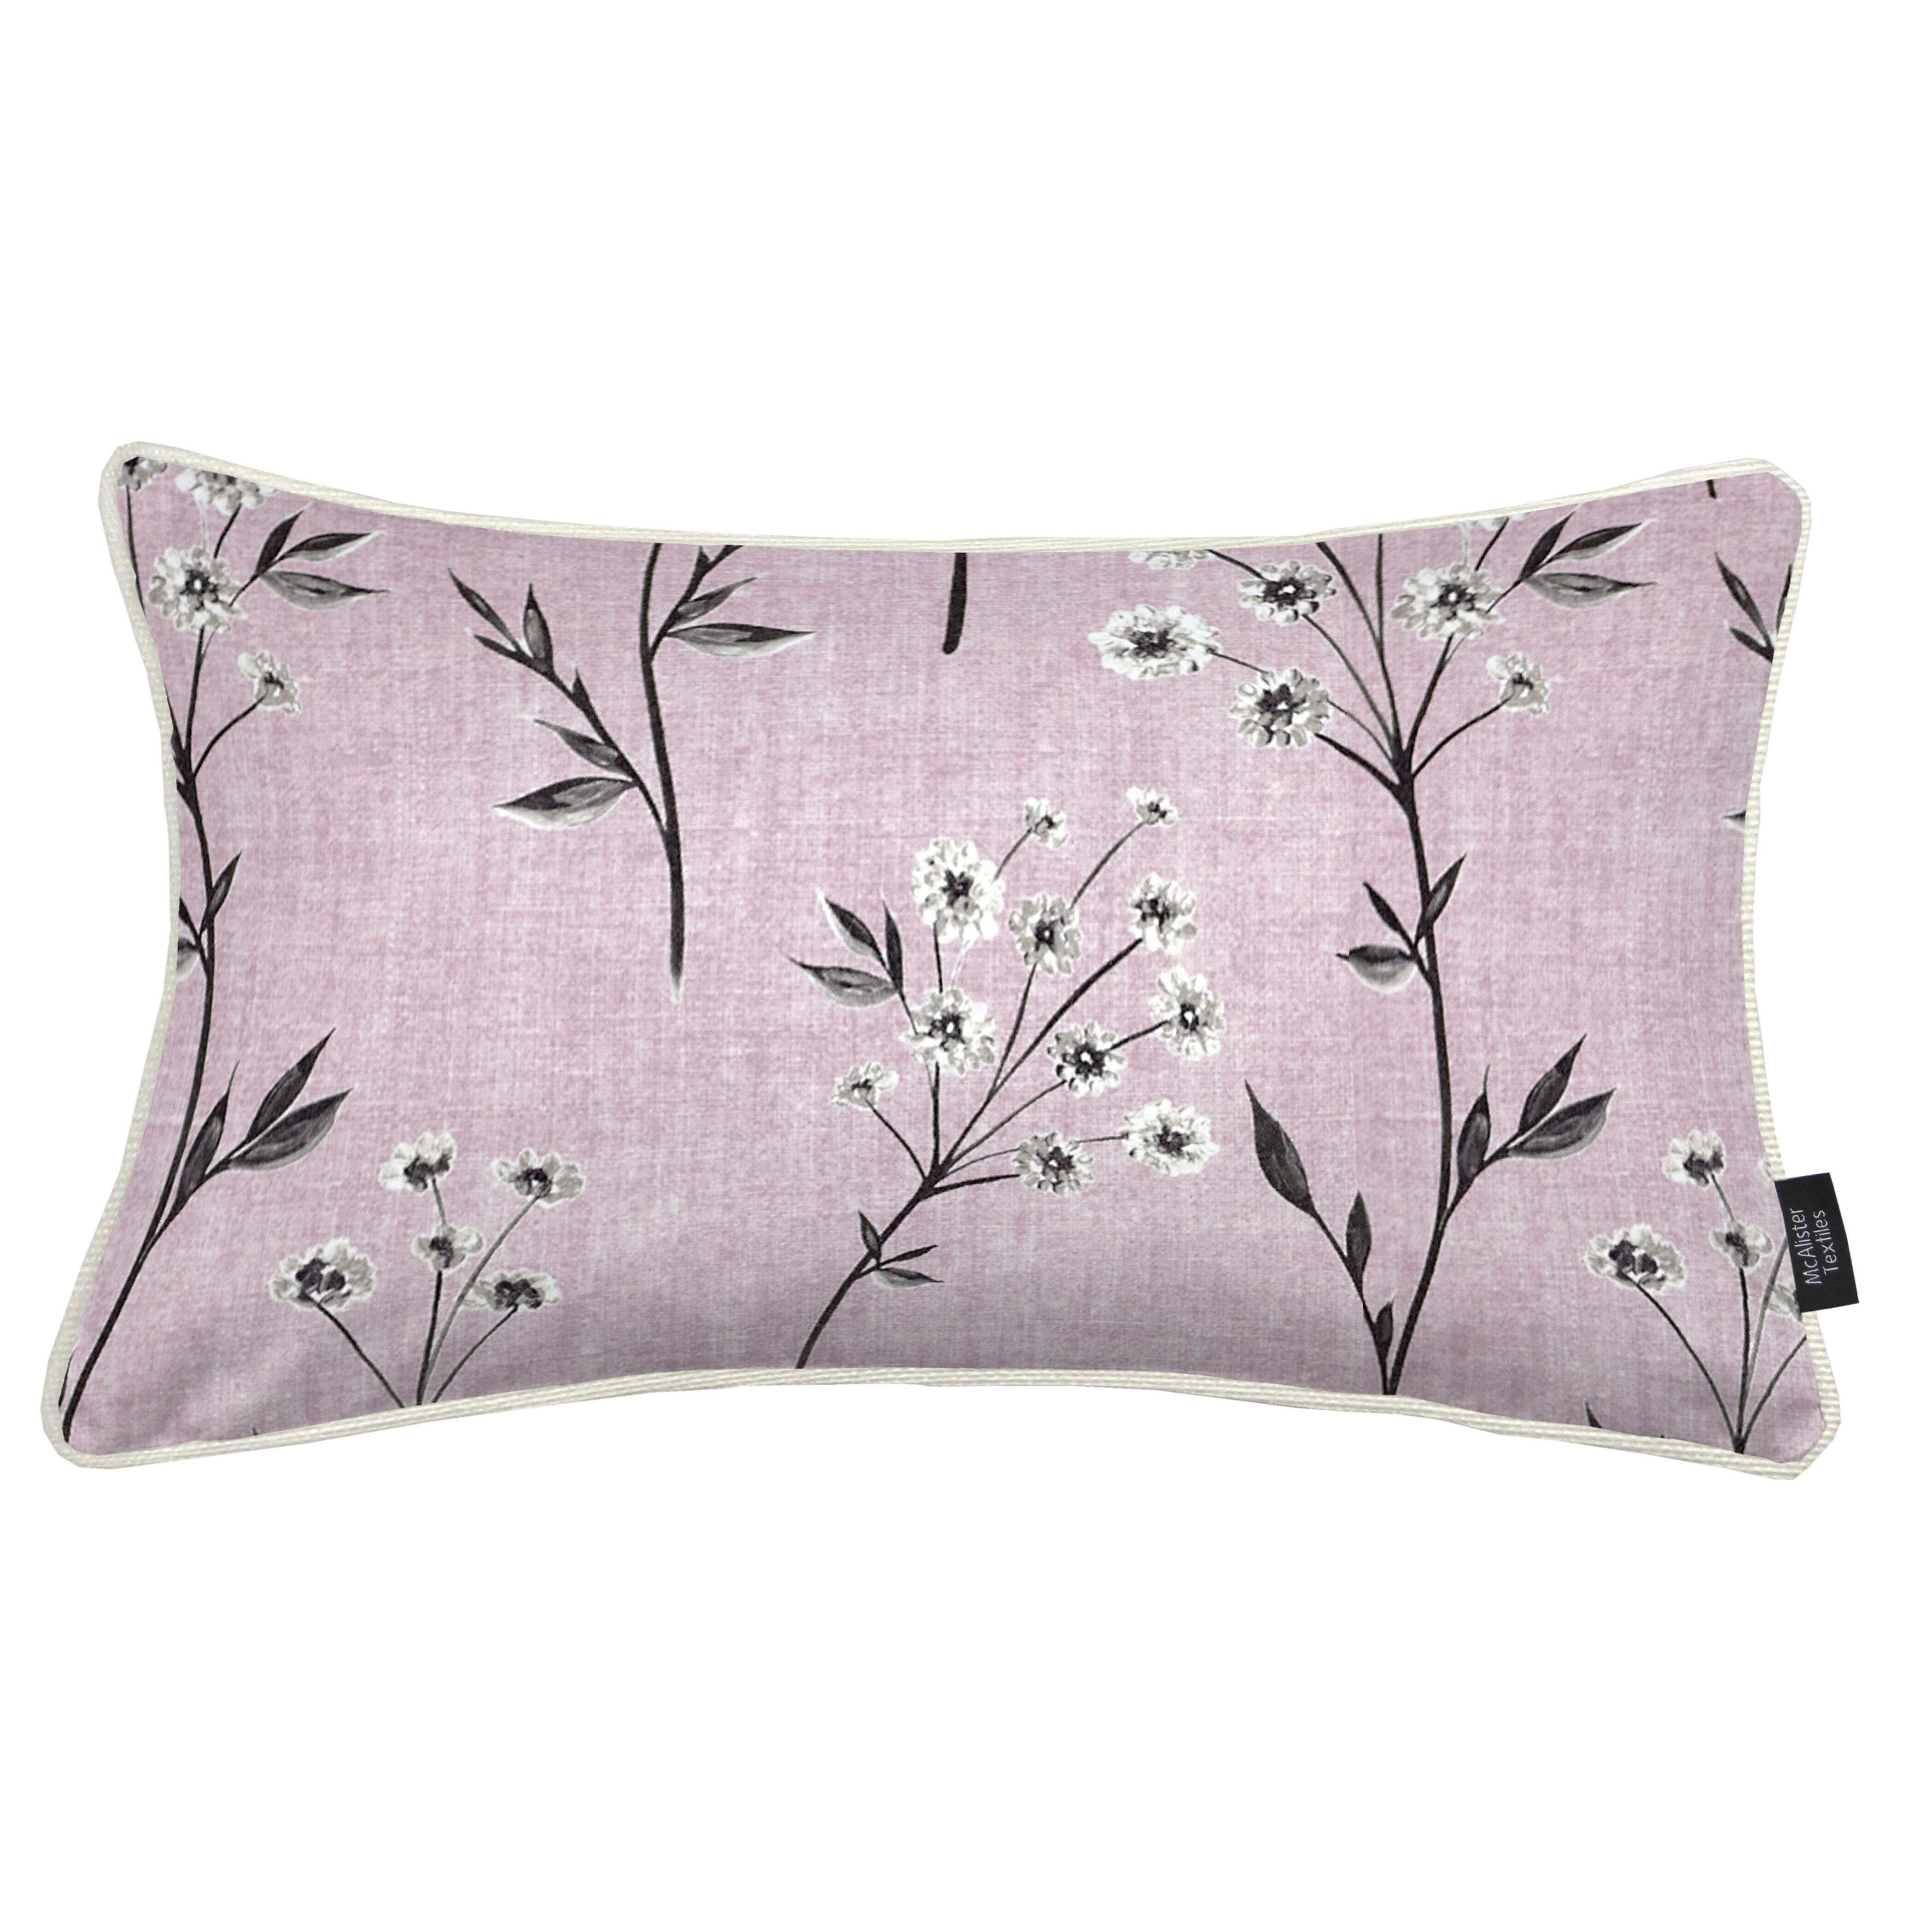 Meadow Blush Pink Floral Cotton Print Cushions, Polyester Filler / 50cm x 30cm